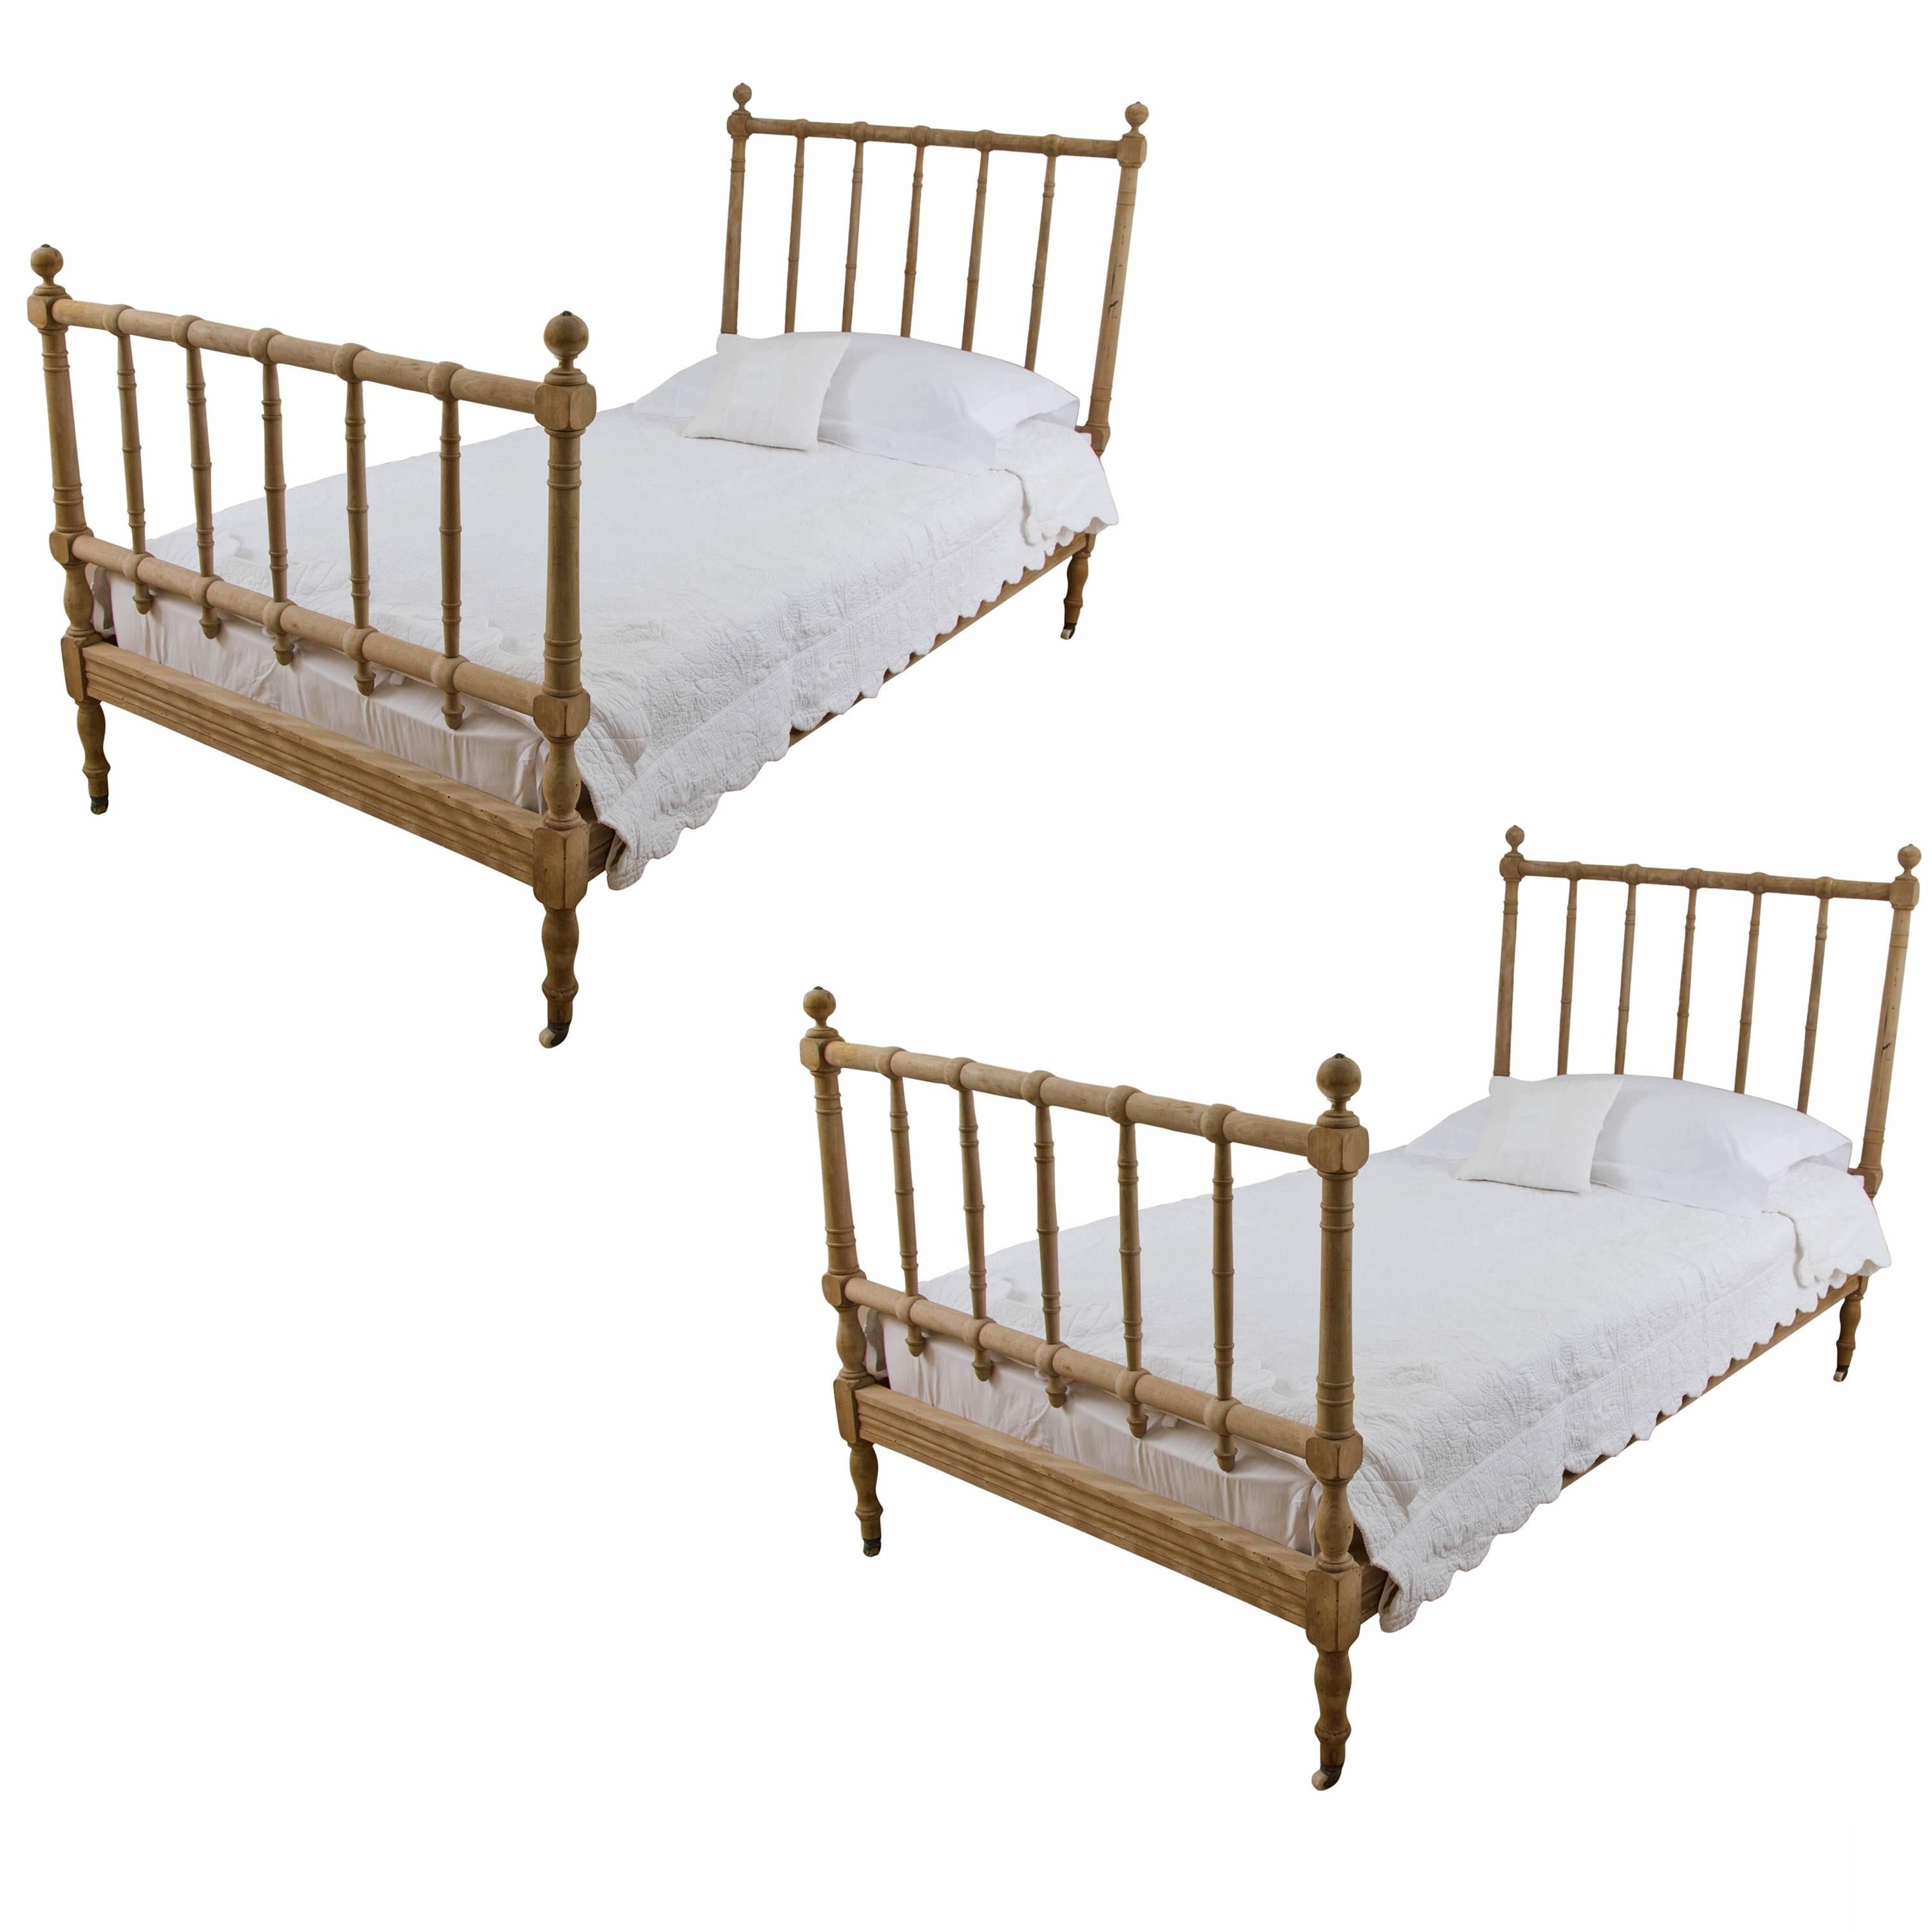 Pair of 19th Century French Single Beds by A. Bastet, Lyon, France